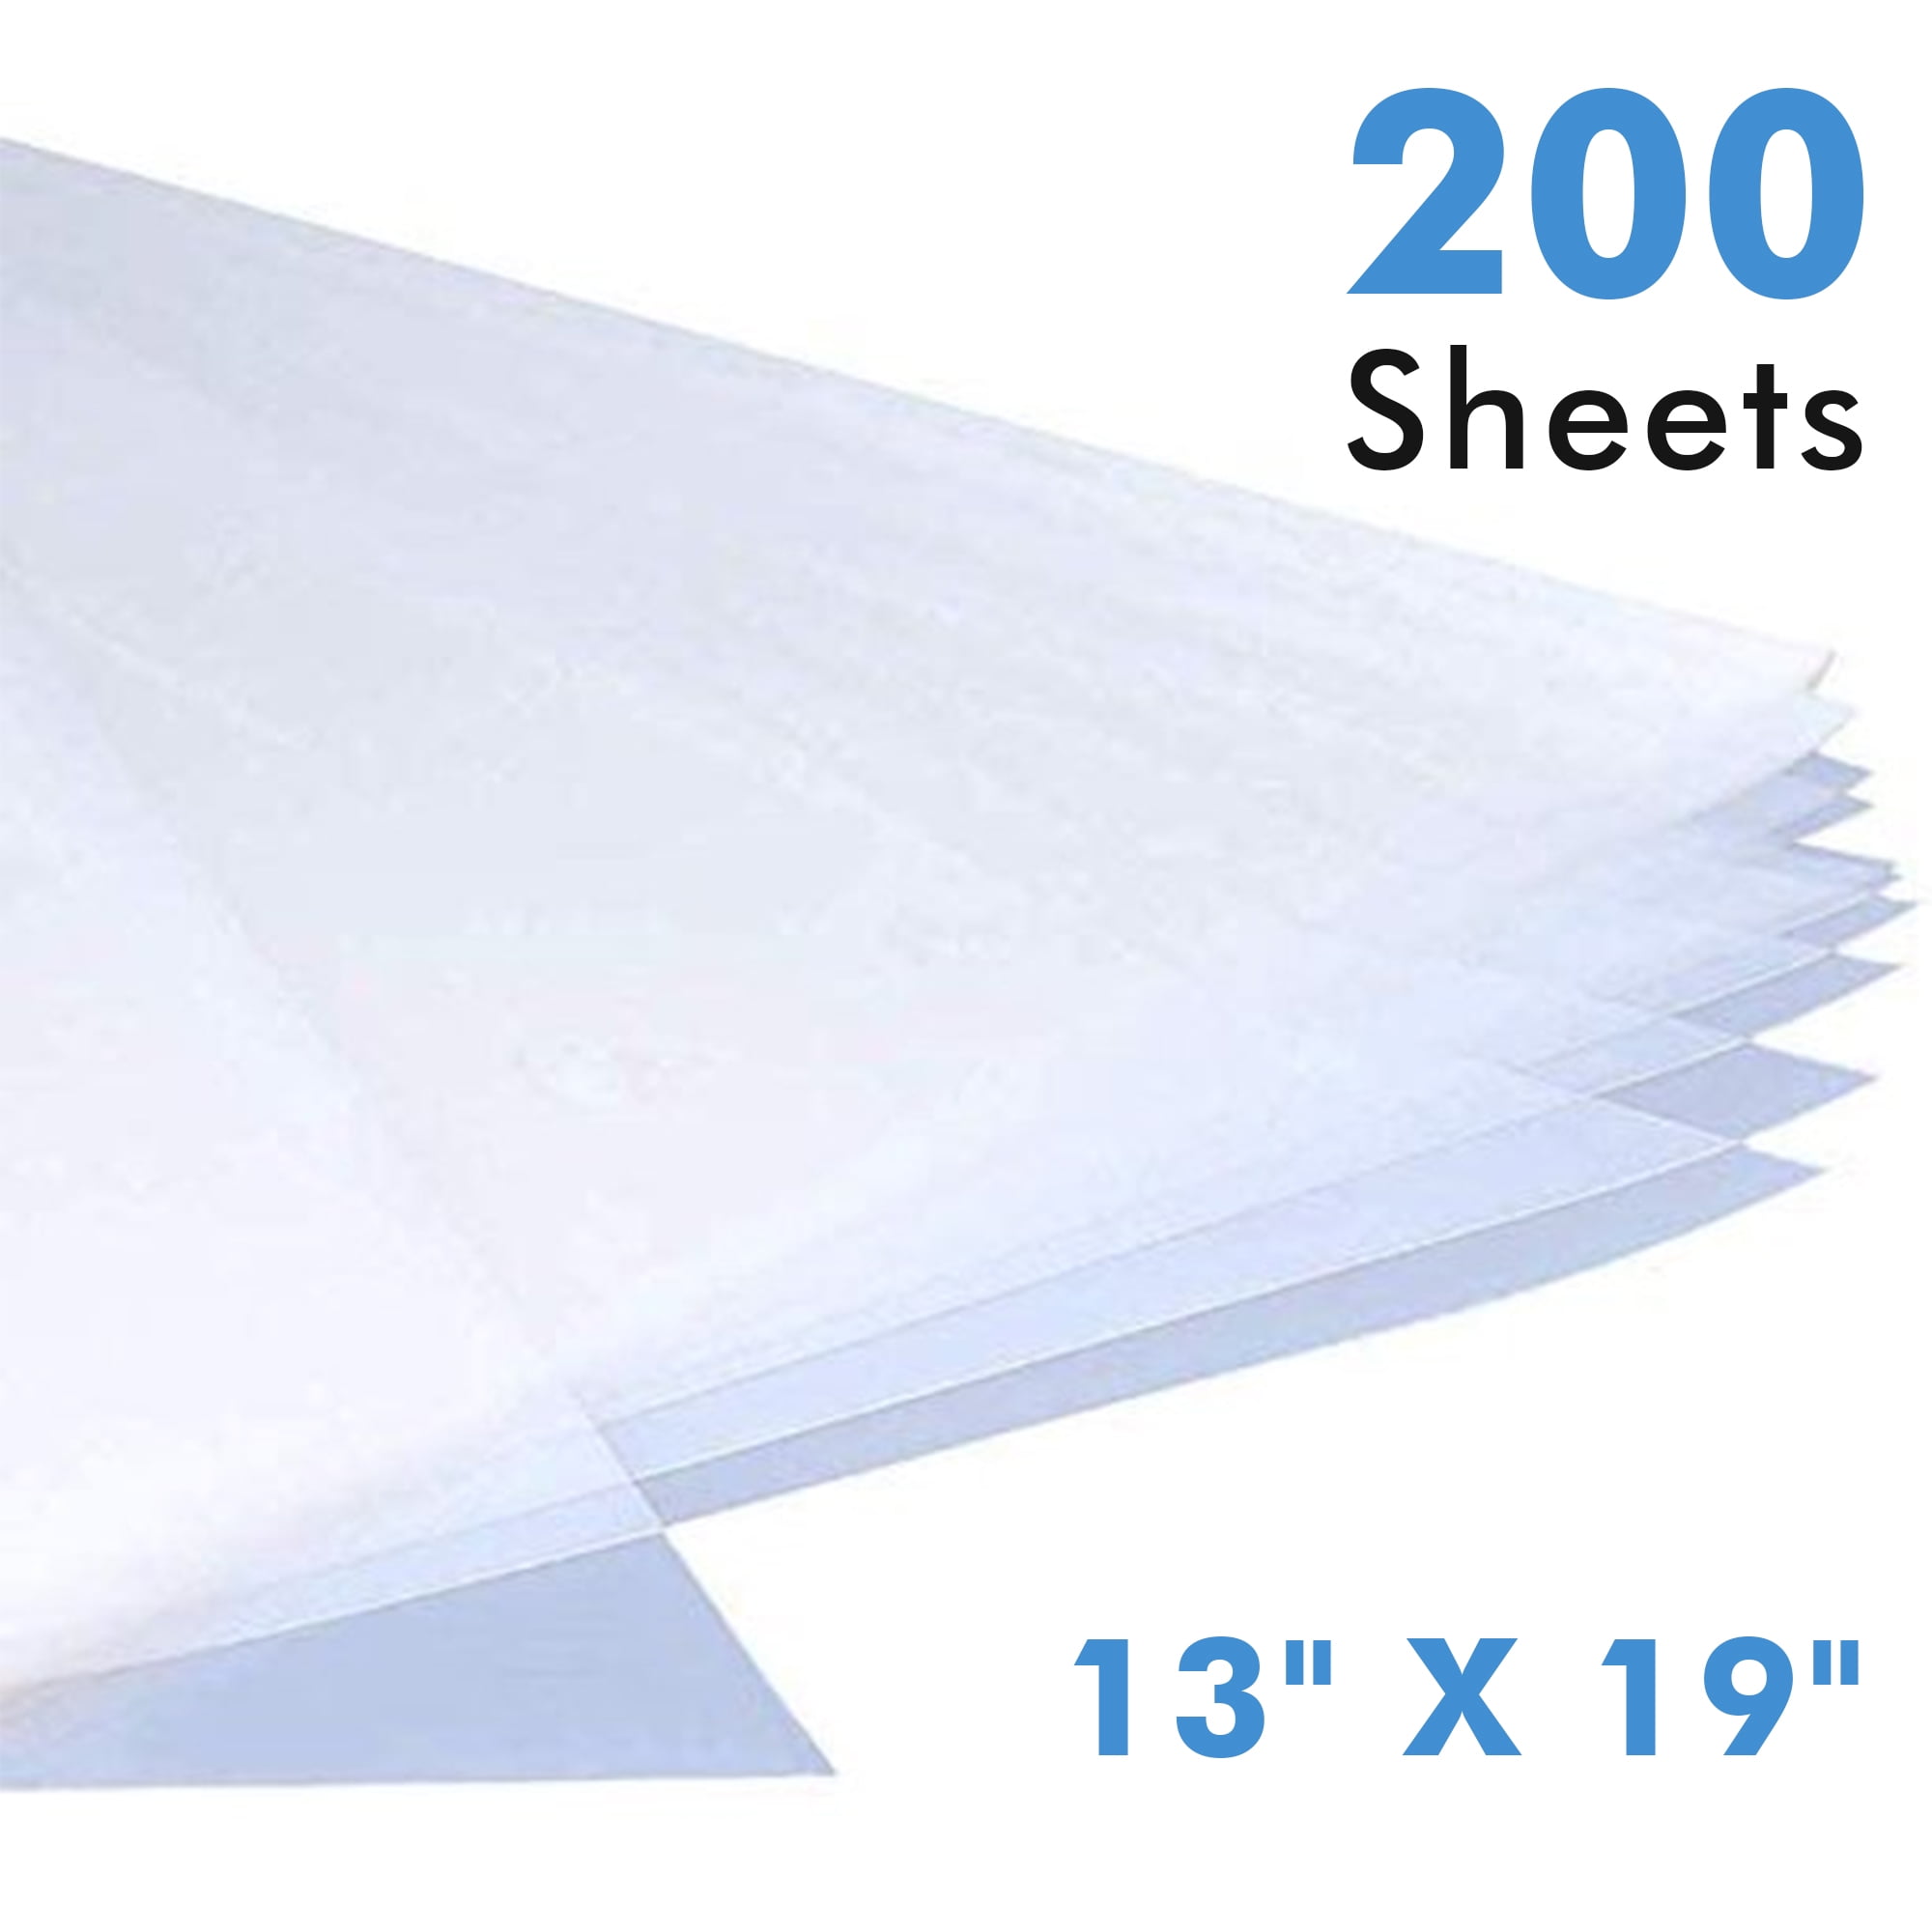 Transparency Films (28 products) find prices here »